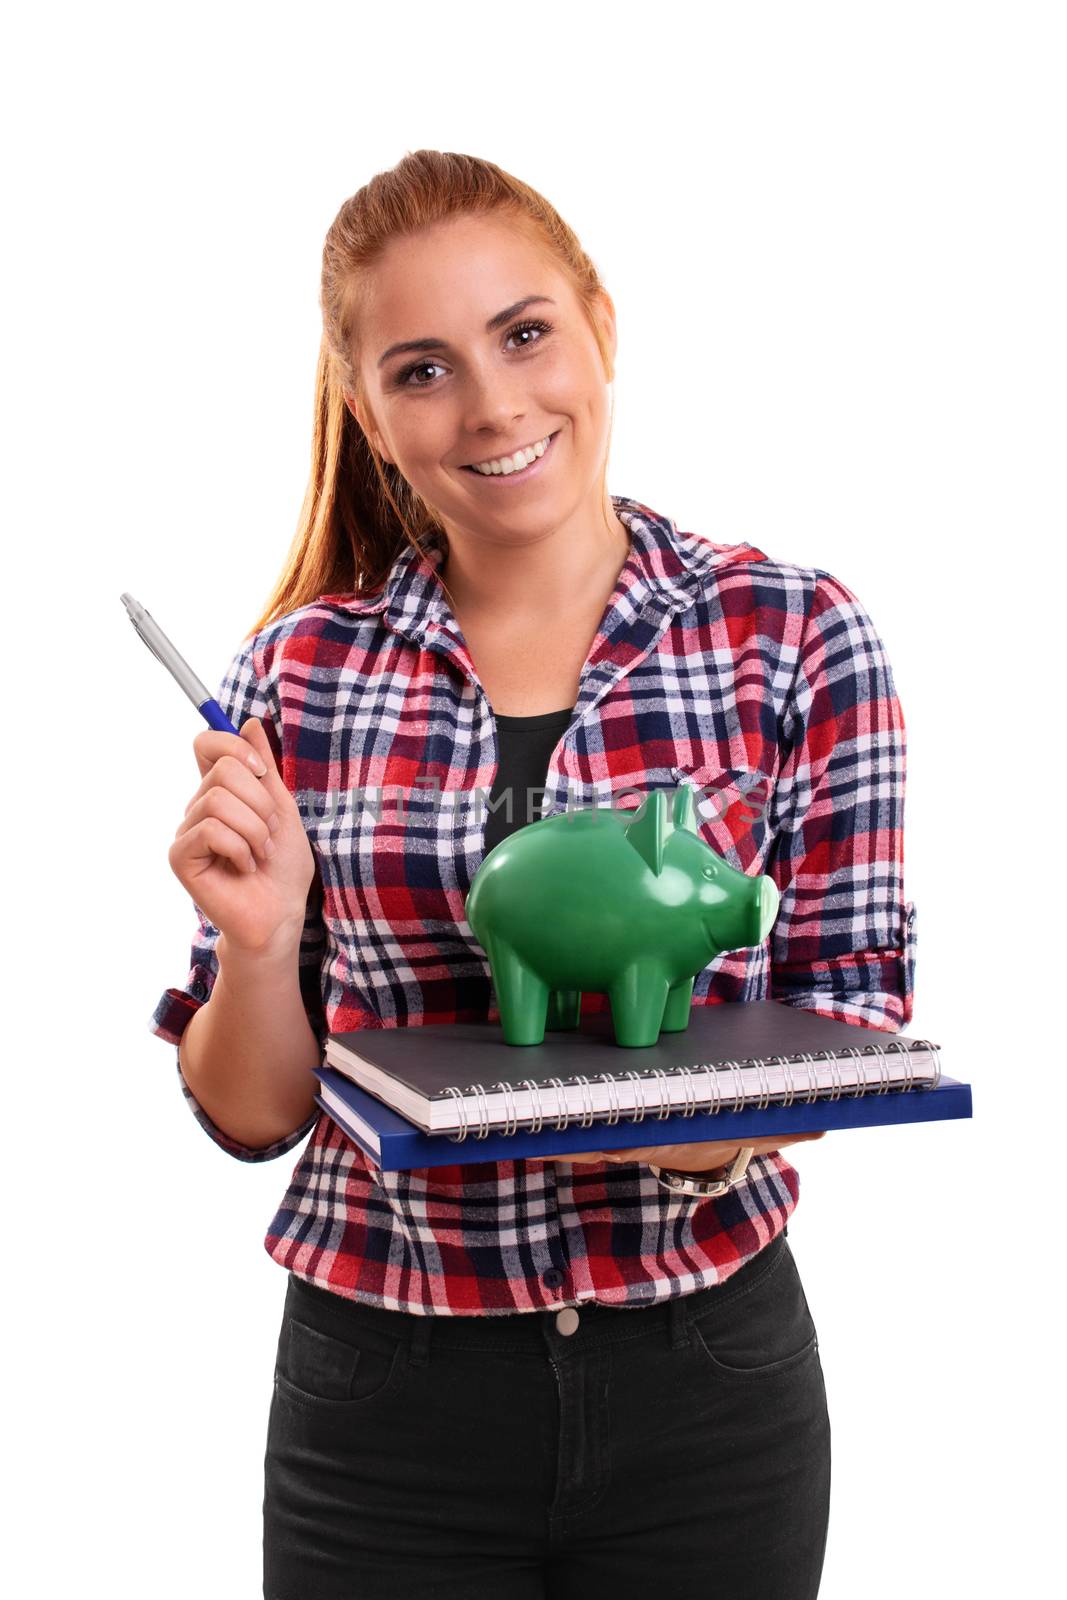 Smiling young student holding a green piggy bank on a stack of books, pointing with a pen, isolated on white background.